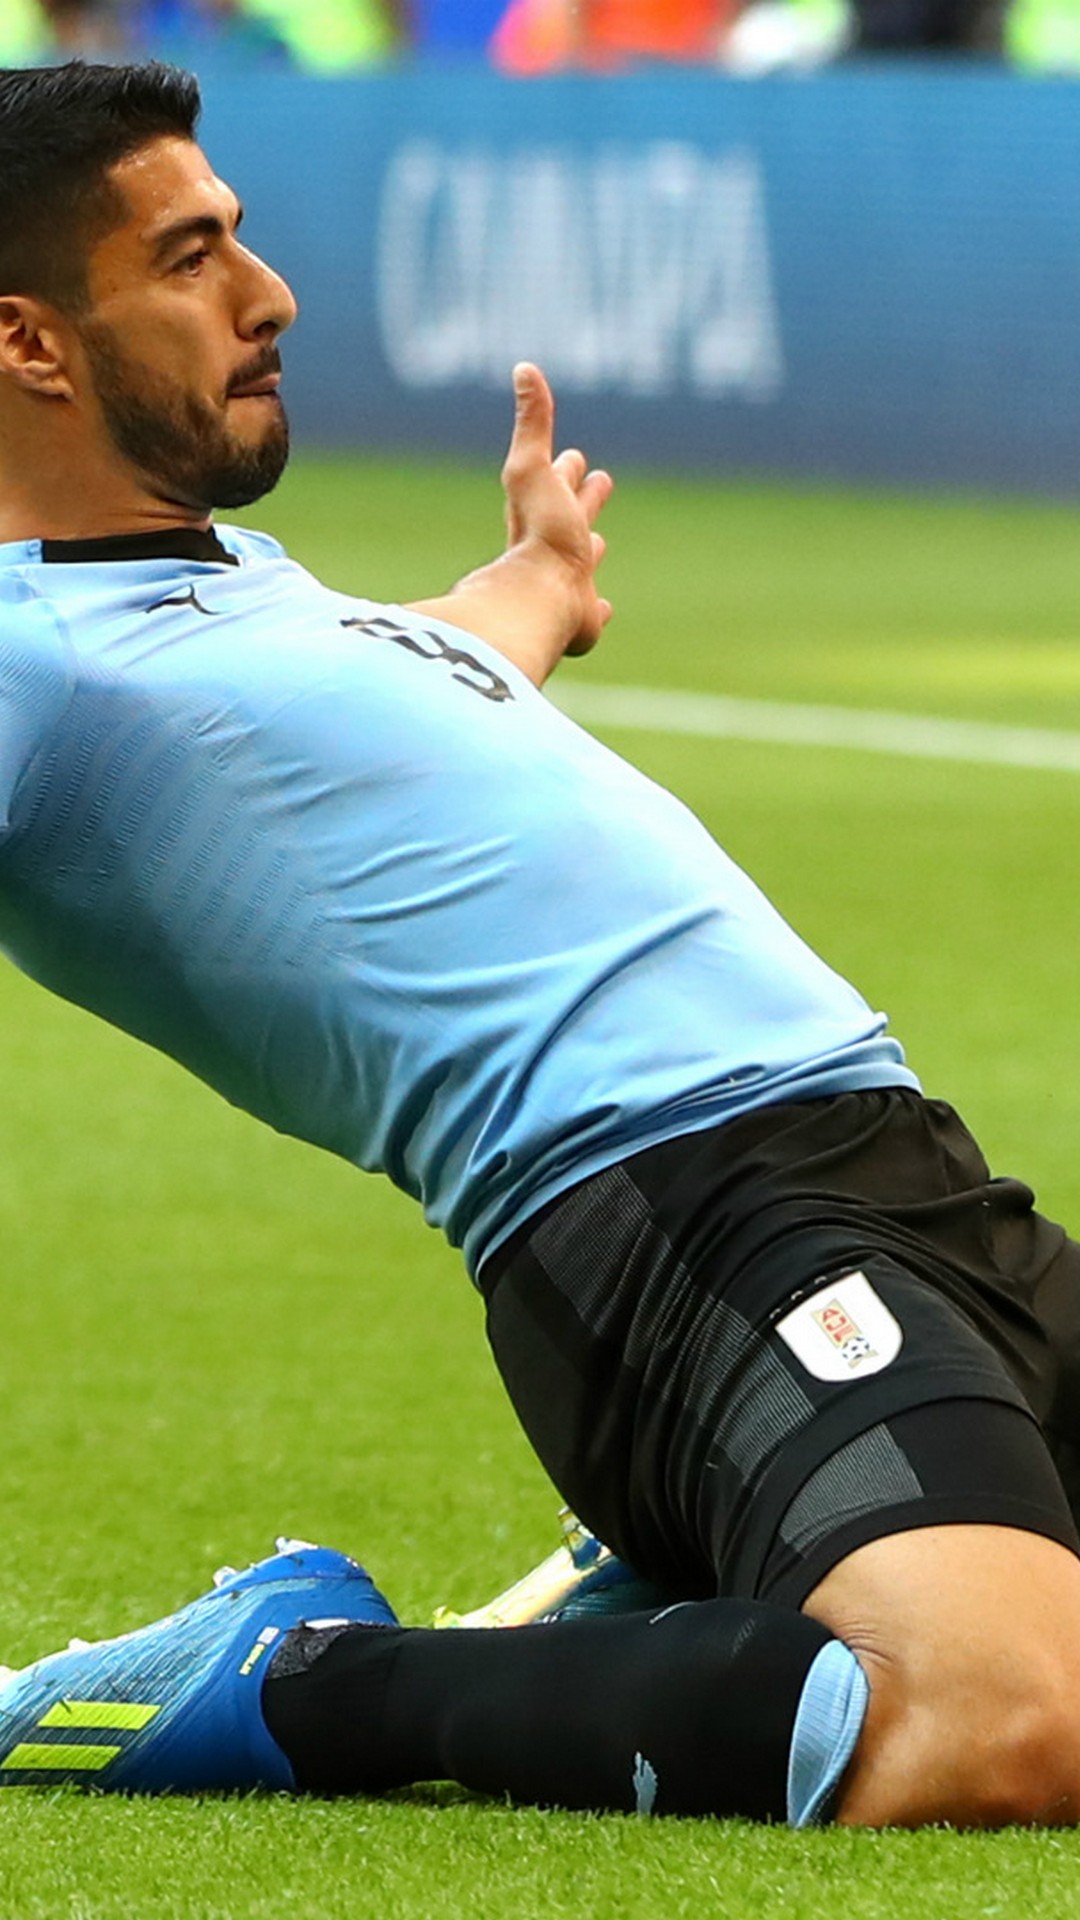 Luis Suarez Uruguay Android Wallpaper with image resolution 1080x1920 pixel. You can make this wallpaper for your Android backgrounds, Tablet, Smartphones Screensavers and Mobile Phone Lock Screen